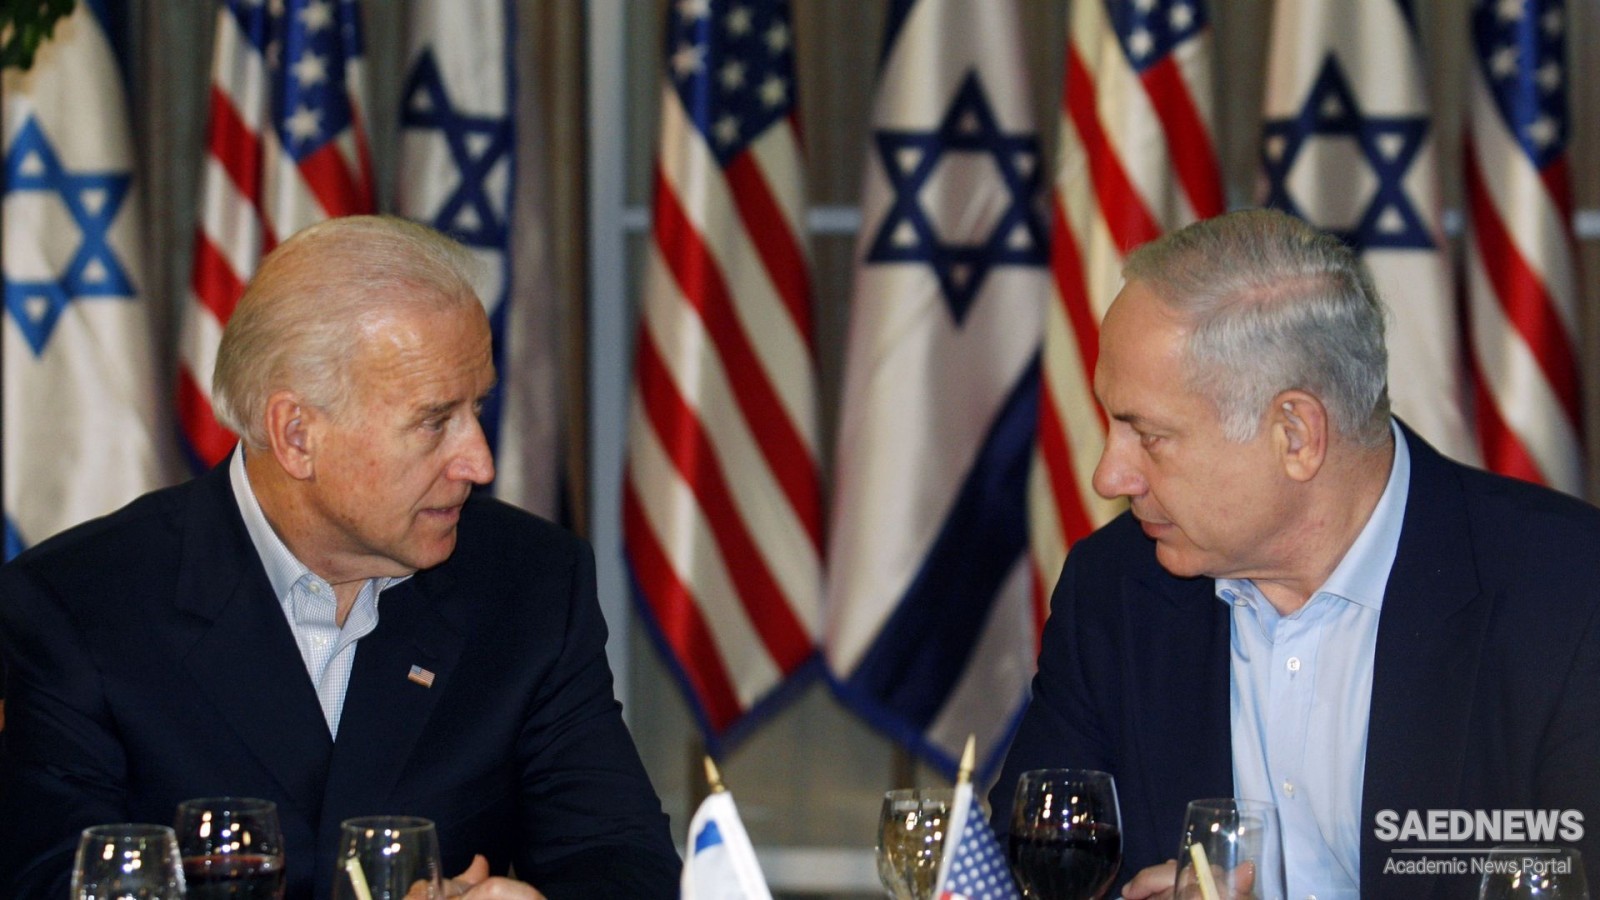 Netanyahu Waited a Month Long for This Call and Finally It Happened